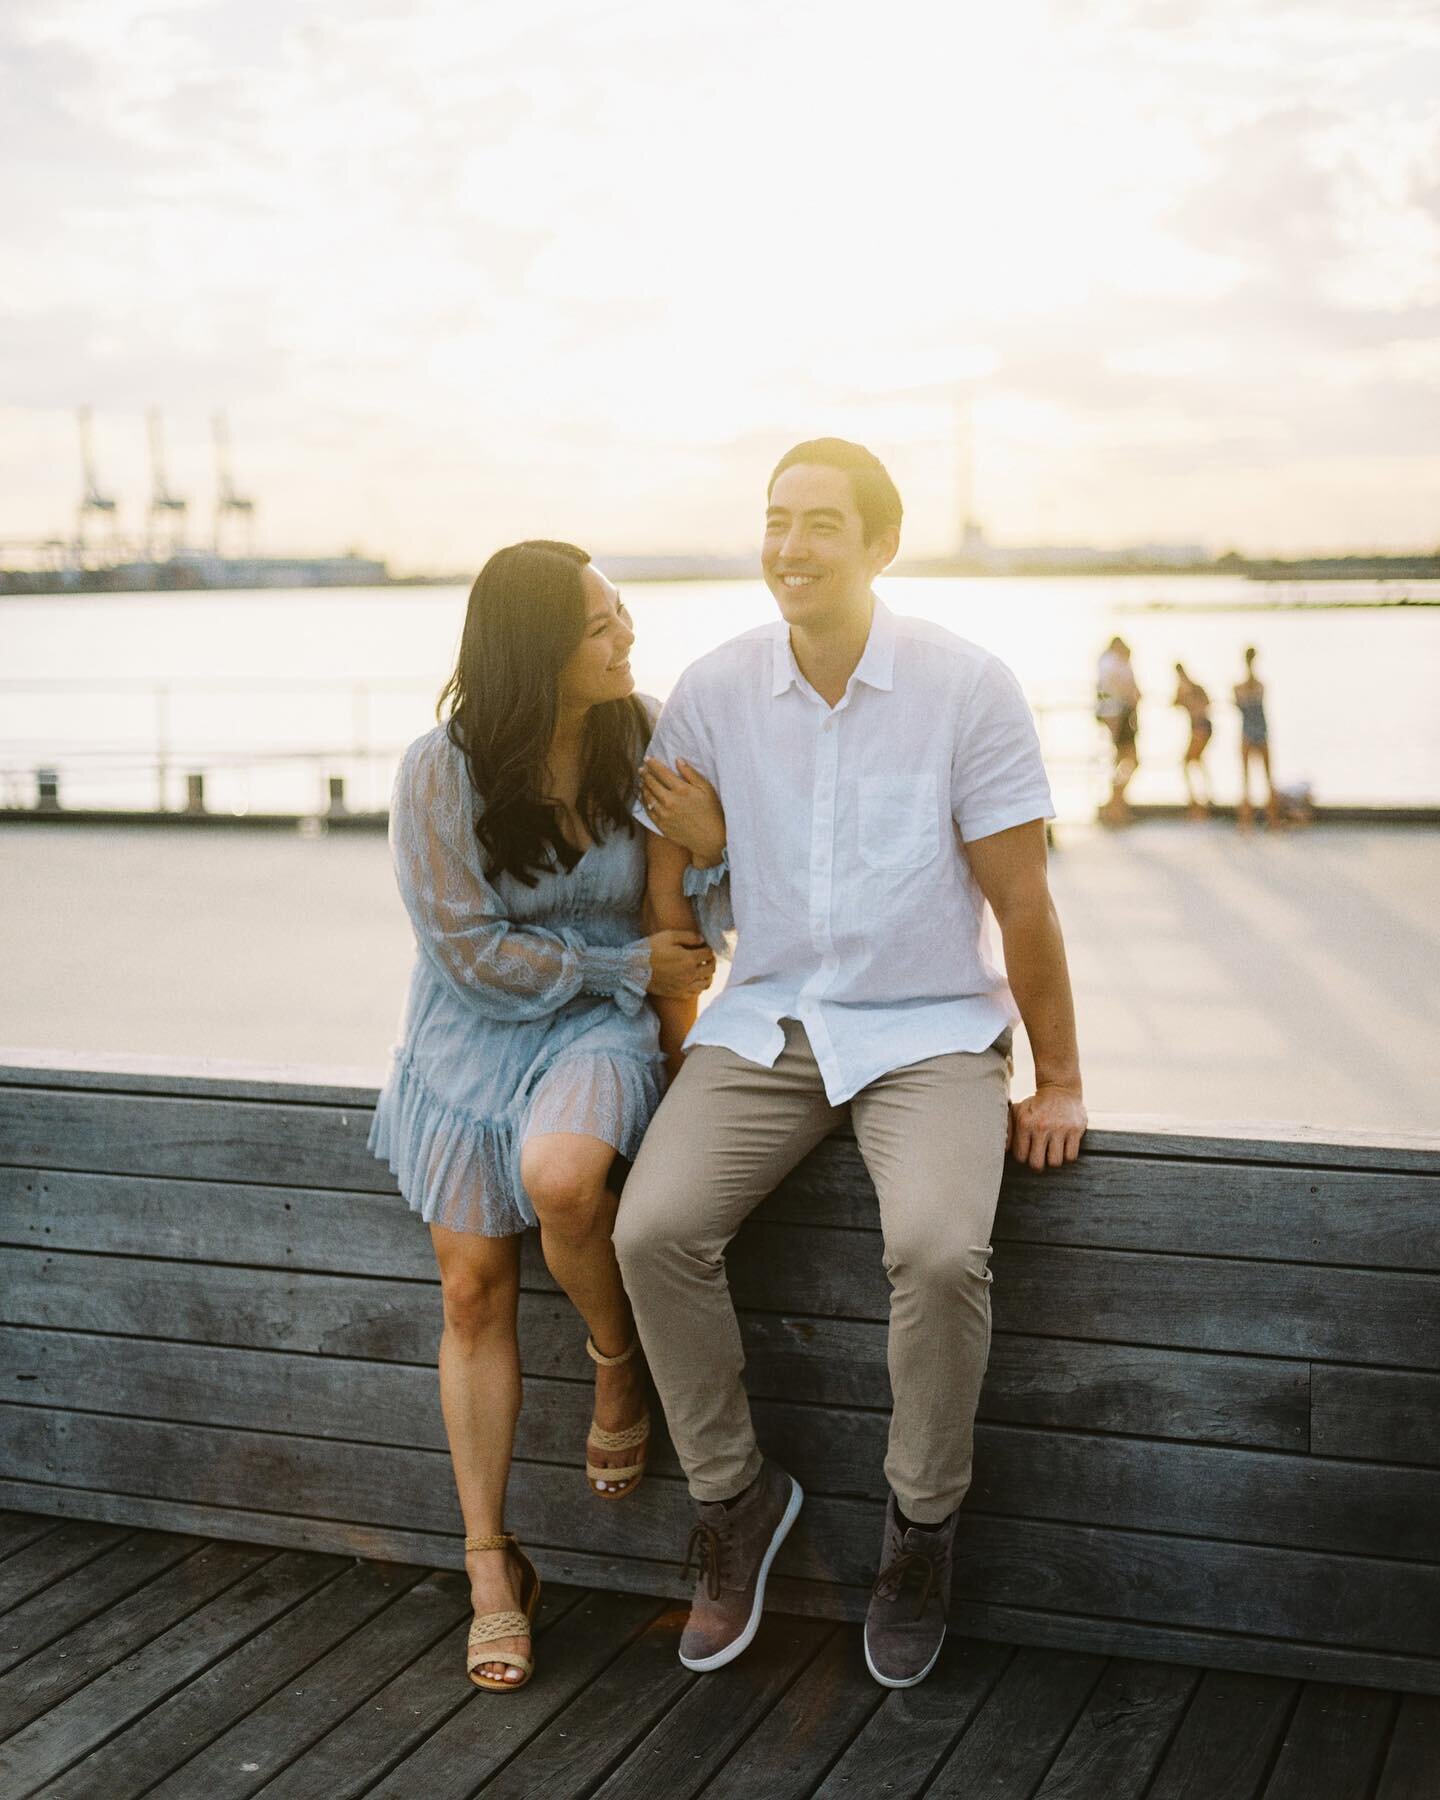 A recent engagement at Port Melbourne with John &amp; Pei

#momentsovermountains
#momentsonmountains
#belovedstories
#authenticlovemag
#loveandwildhearts
#theweddingpic
#loveauthentic
#soloverly
#melbournewedding
#melbourneweddingphotographer
#firsta